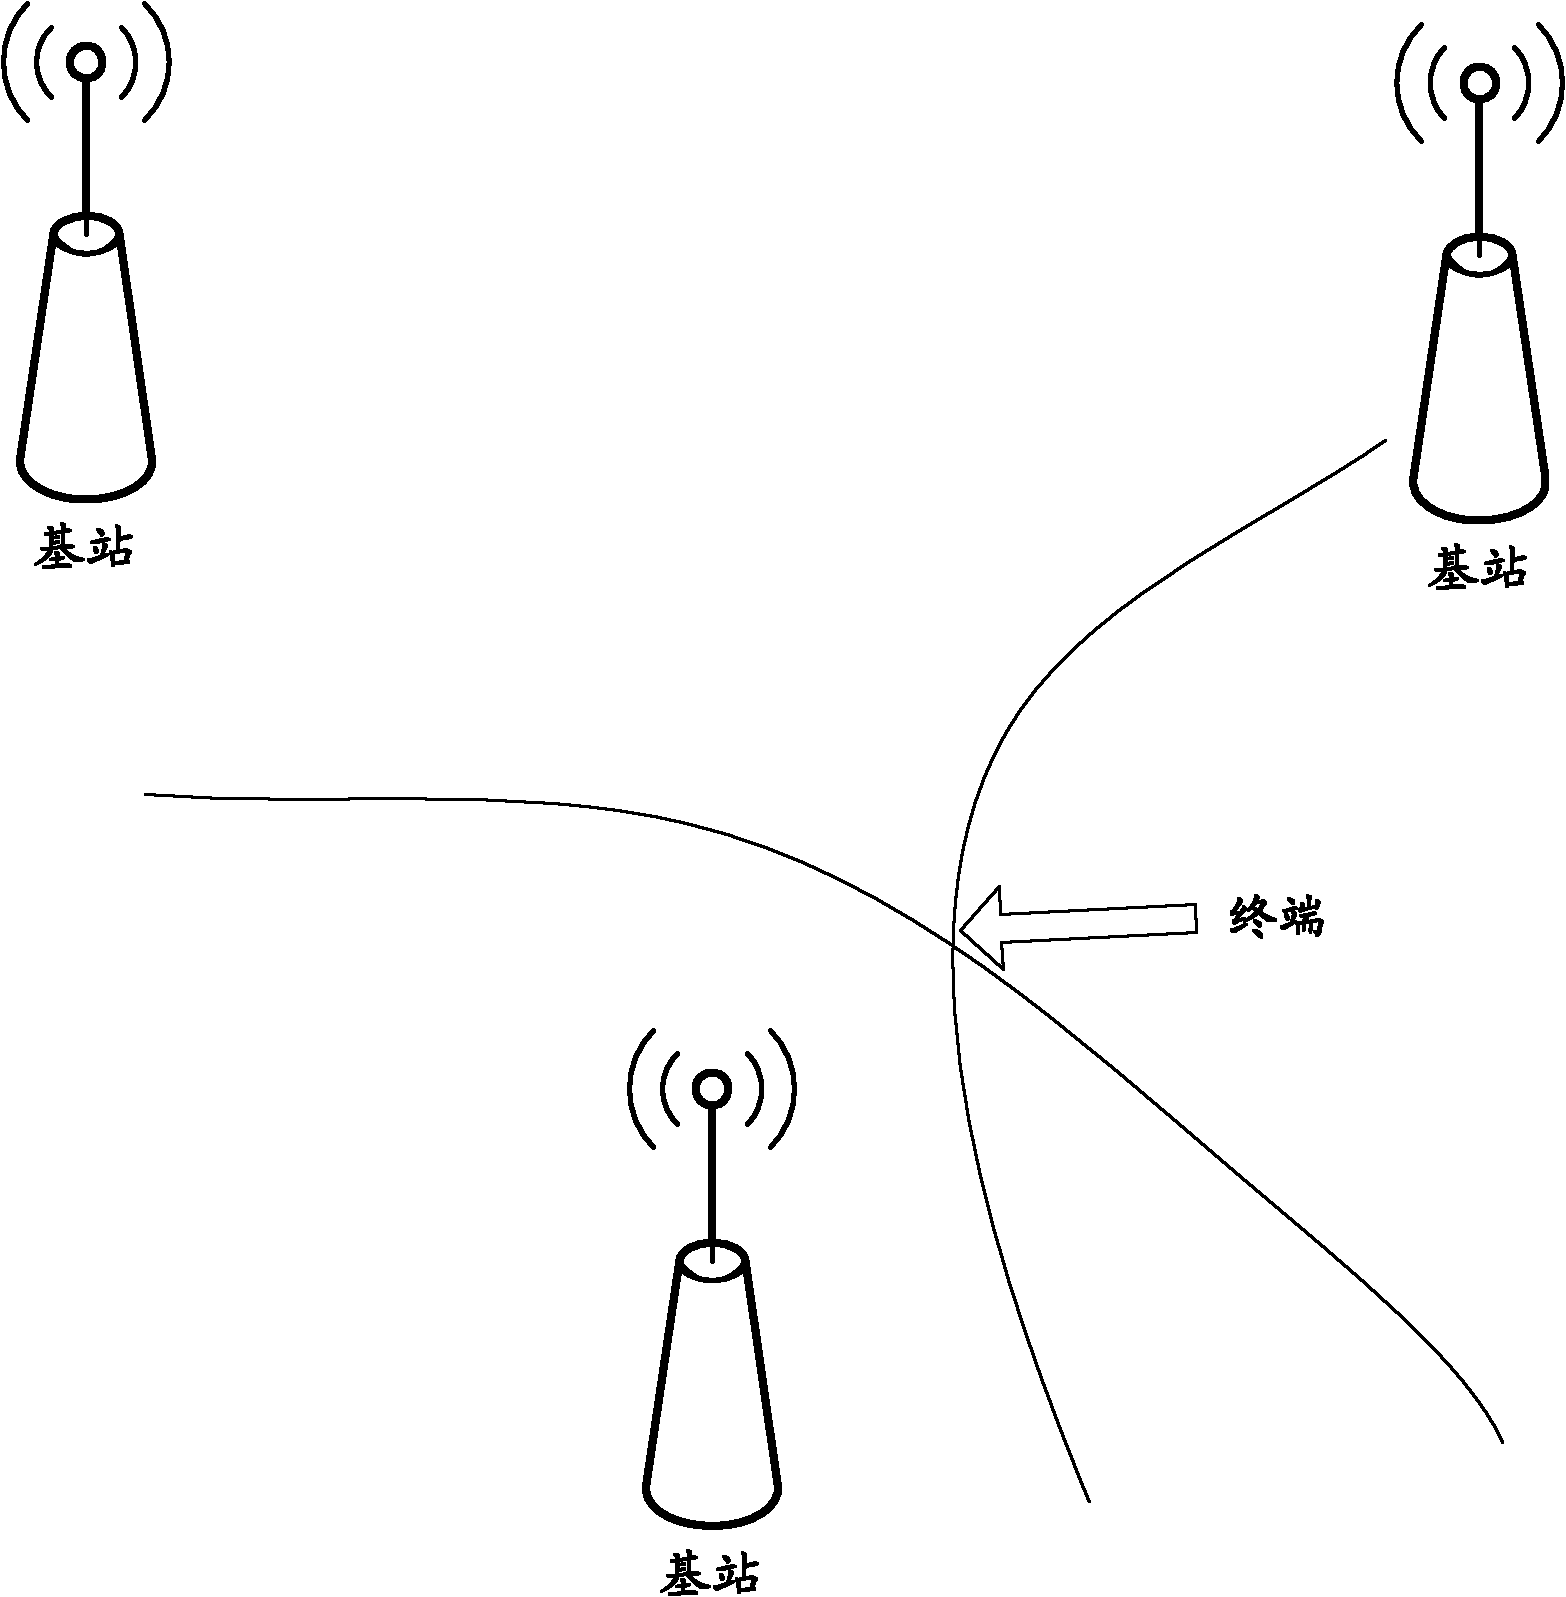 Methods and devices for measuring OTDOA (observed time difference of arrival) and sending positioning assistance data and system